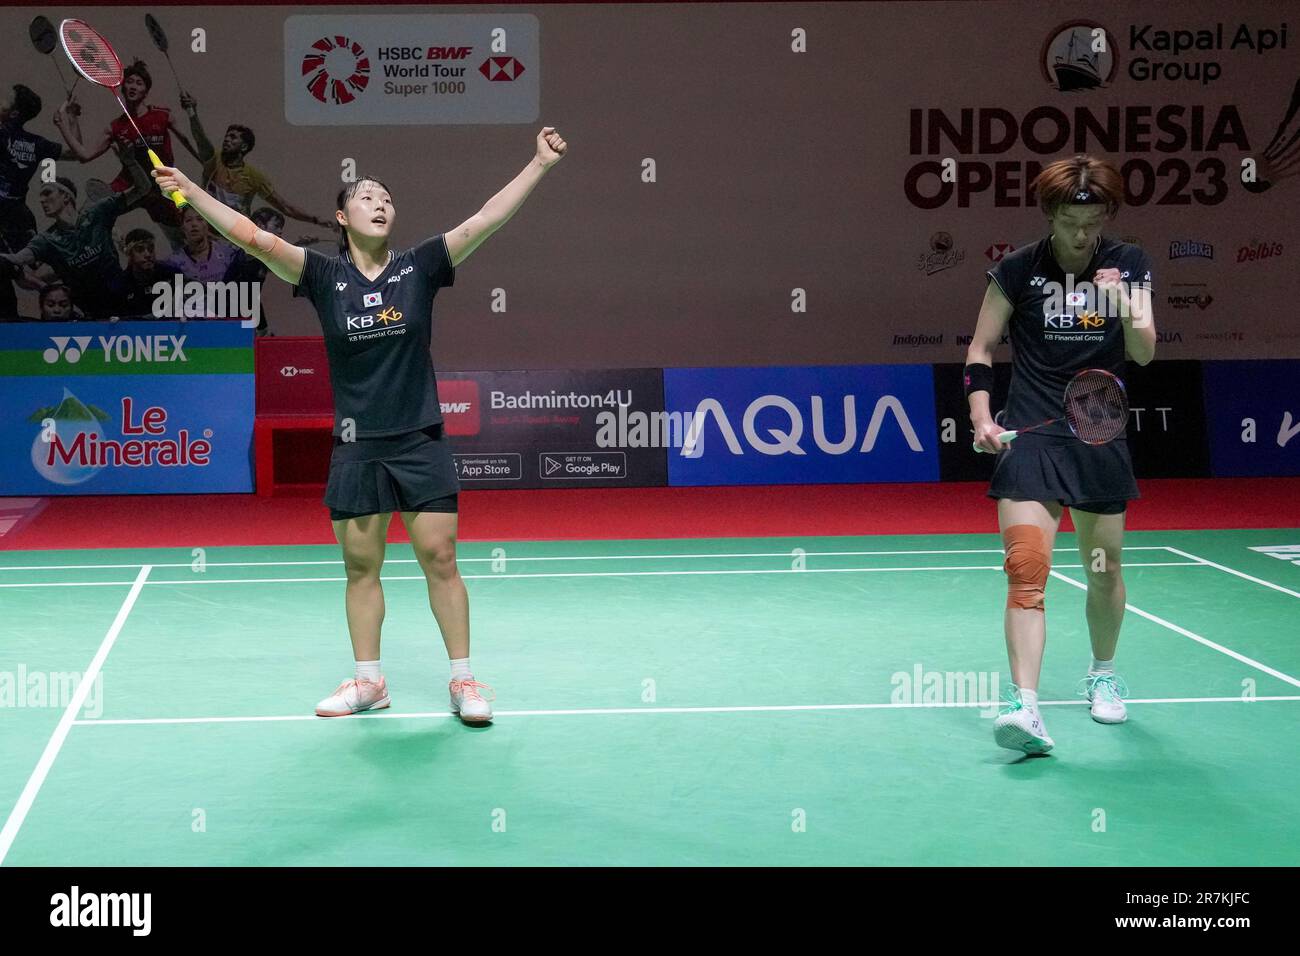 South Koreas Baek Ha-na, left, with Lee So-hee celebrates after defeating against Chinas Jia Yi Fan and Chen Qing Chen during their womens singles quarter final match at Indonesia Open badminton tournament